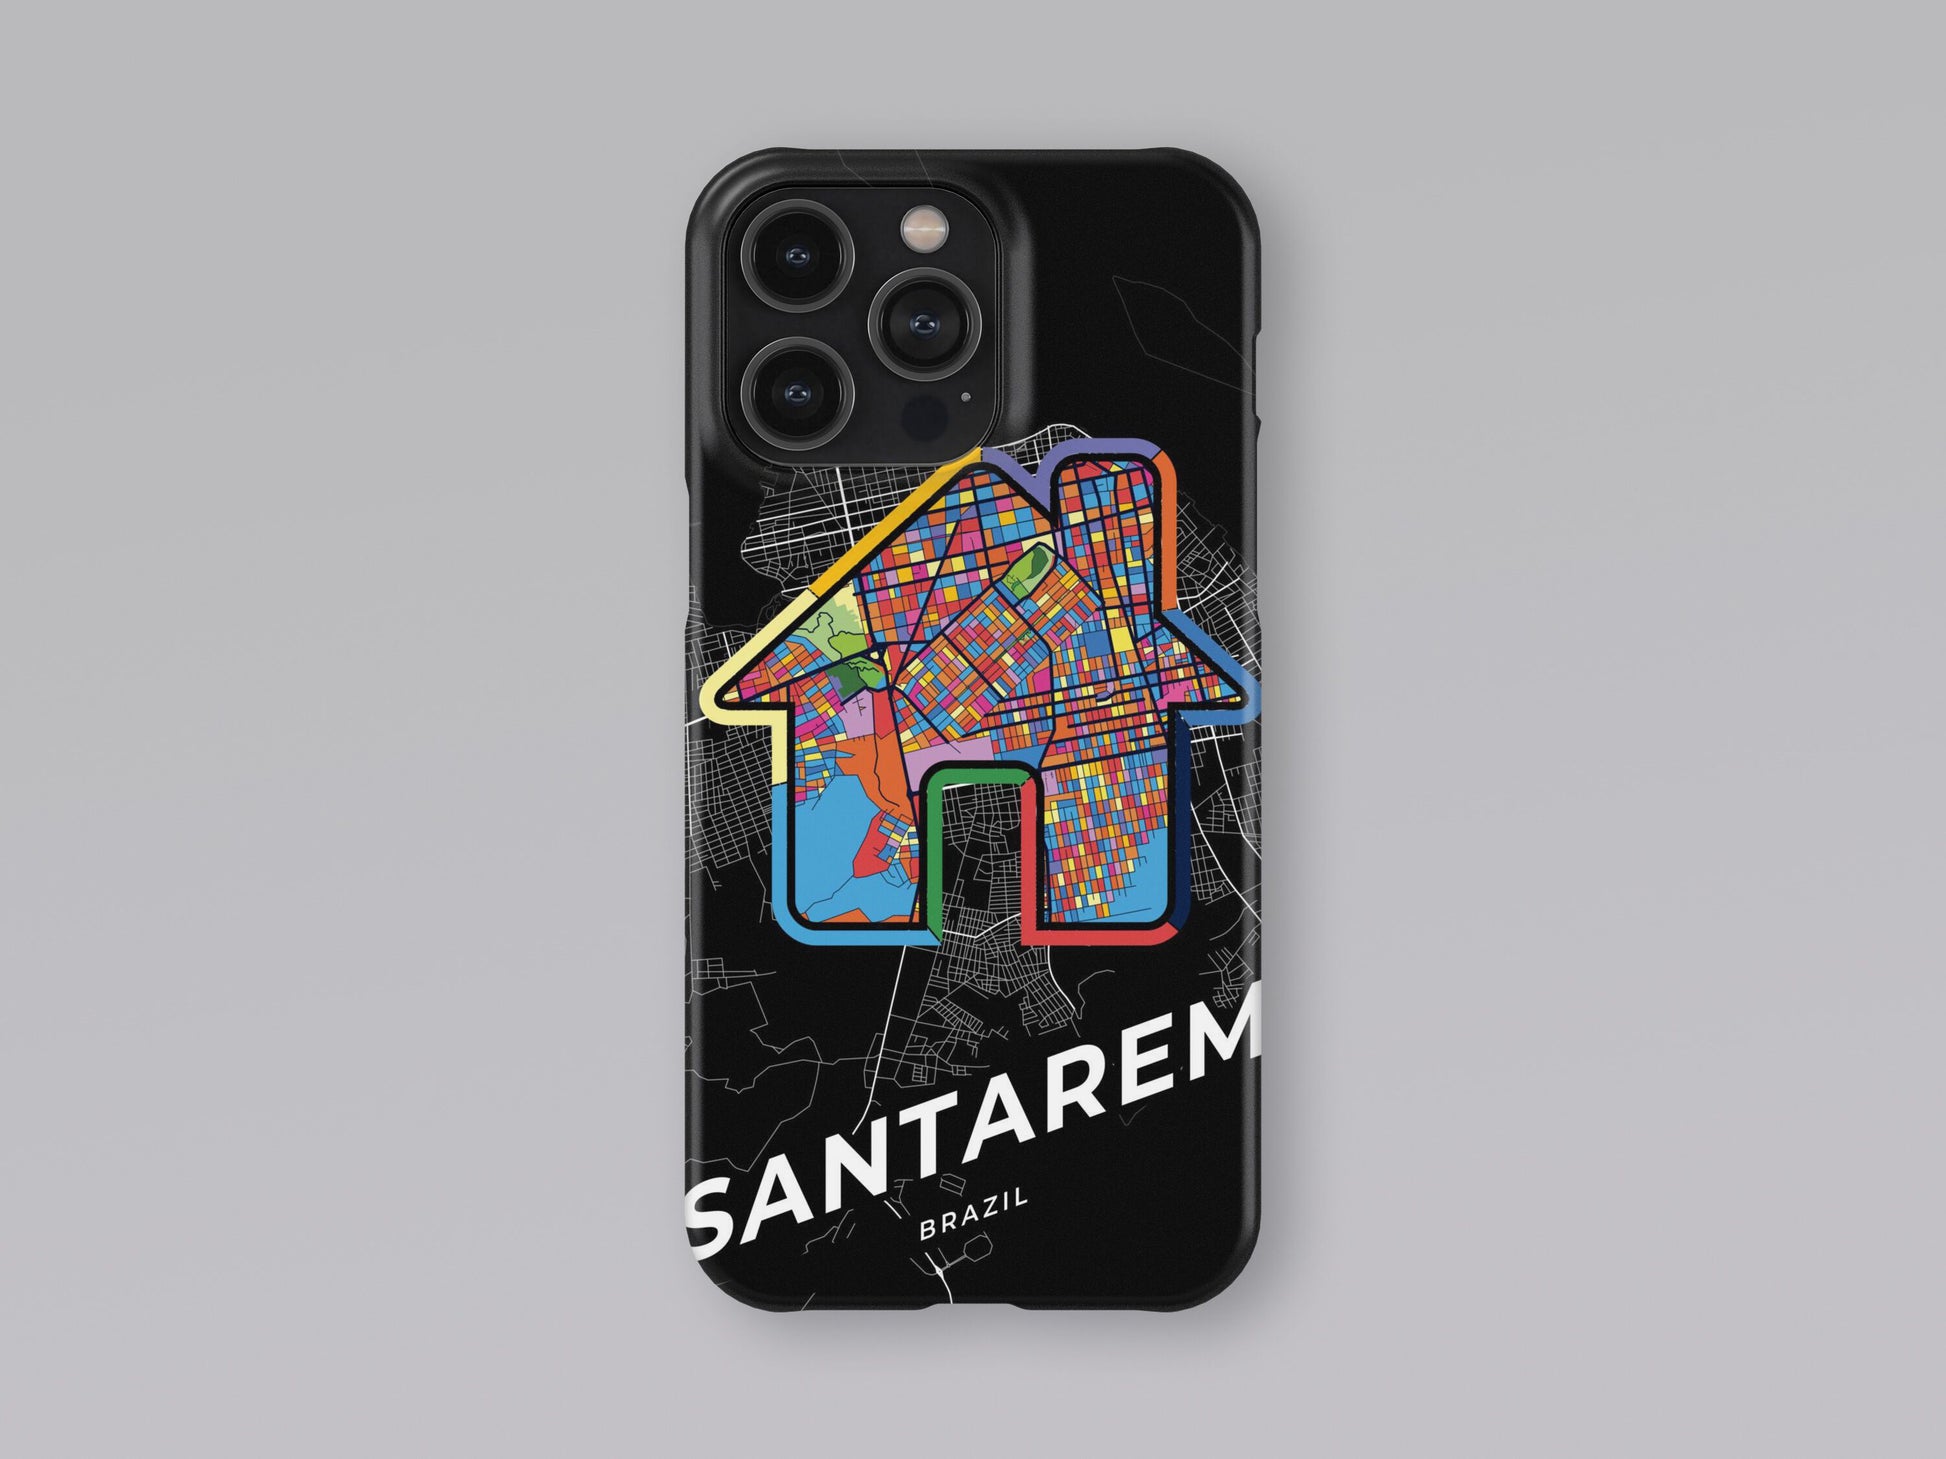 Santarem Brazil slim phone case with colorful icon. Birthday, wedding or housewarming gift. Couple match cases. 3